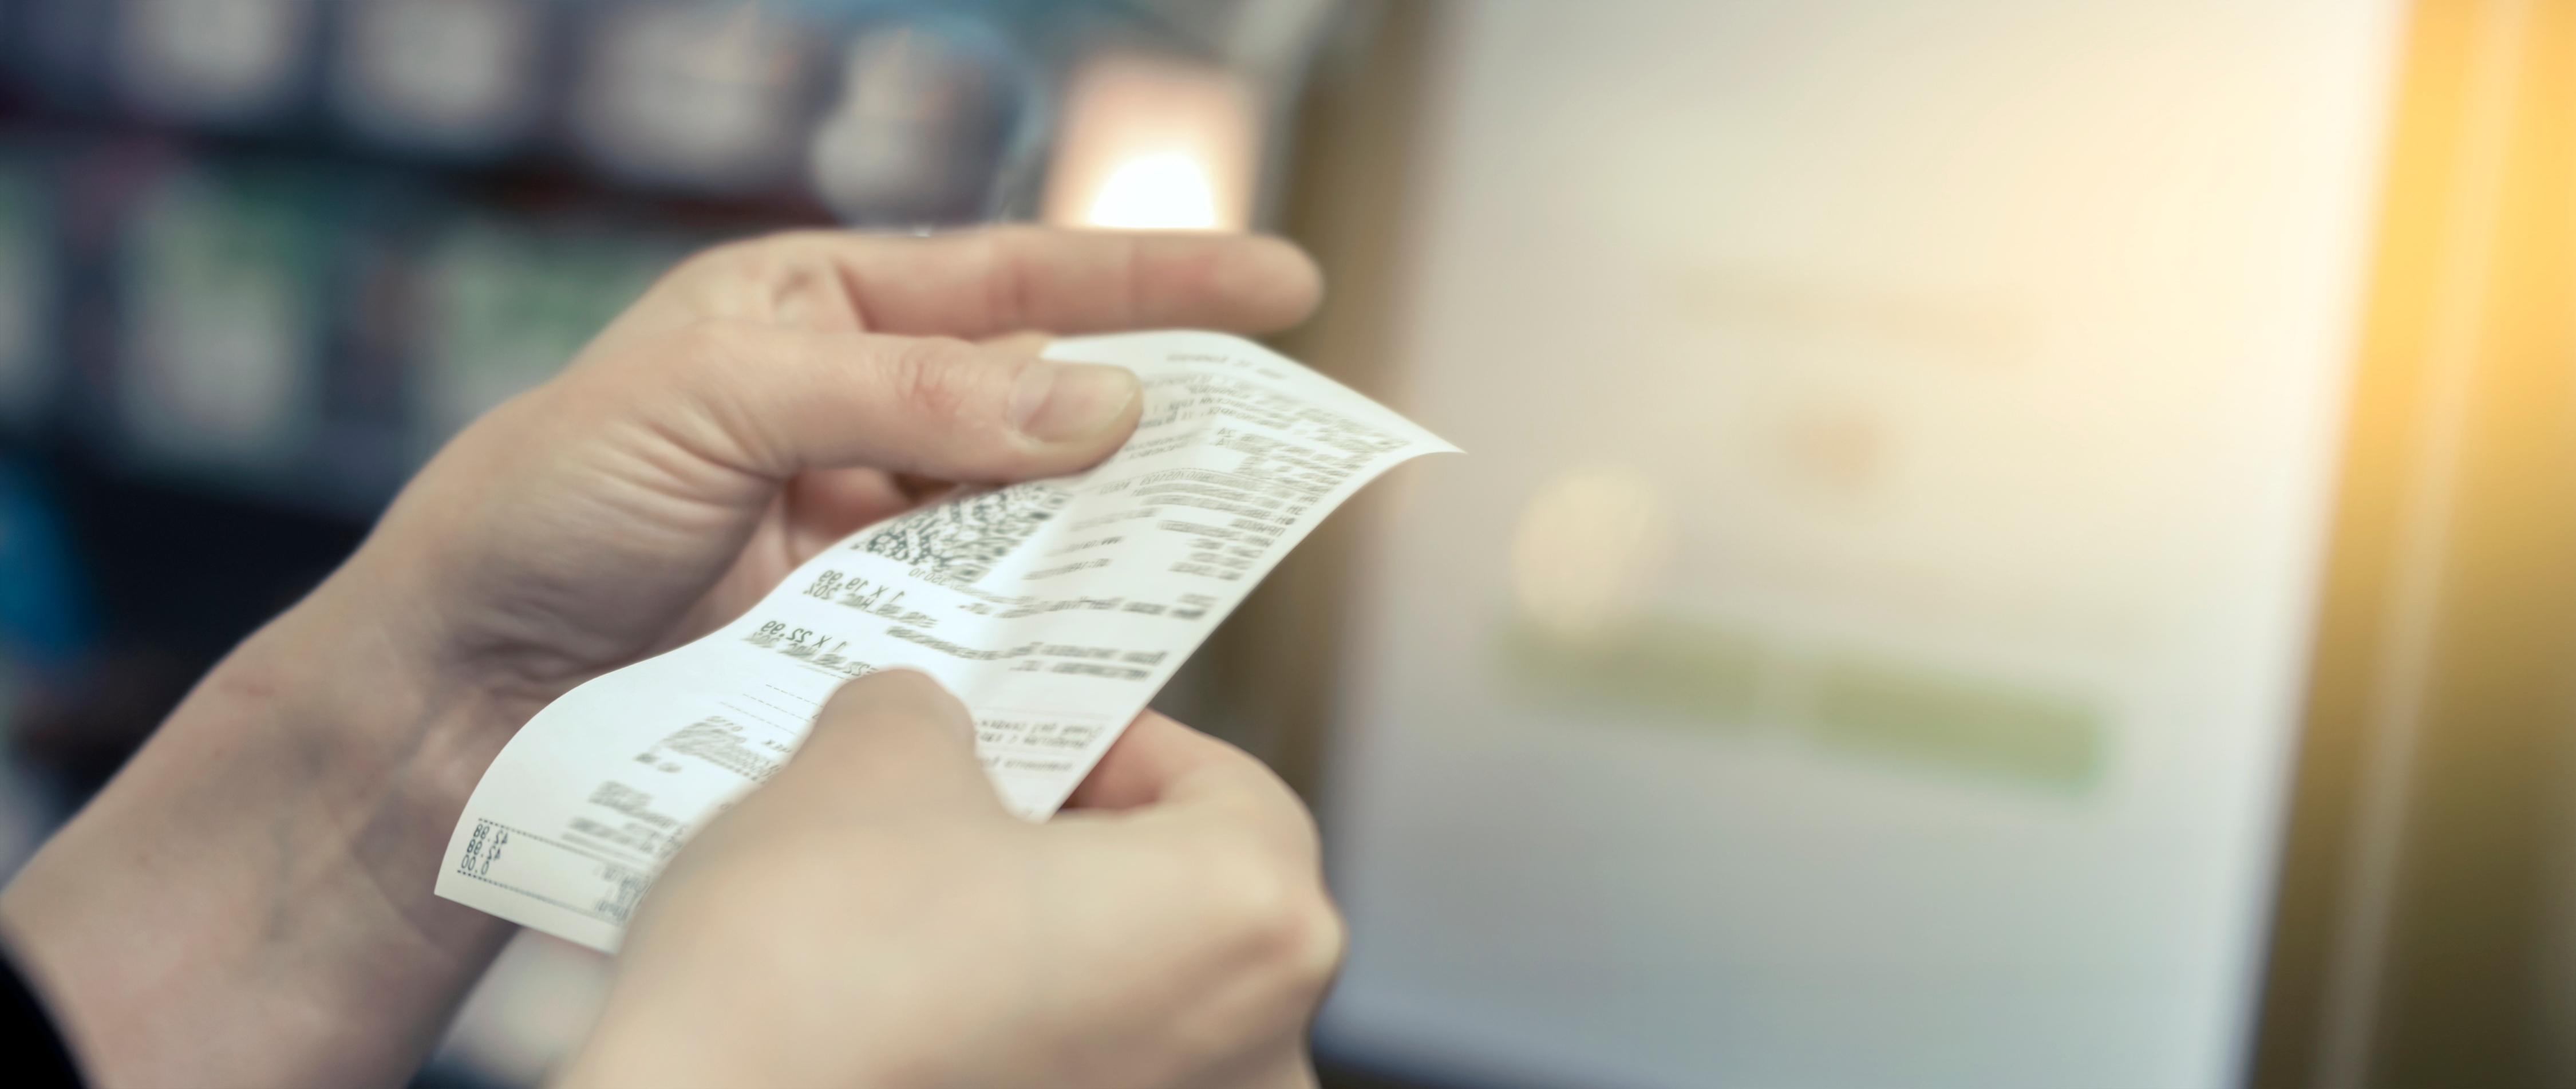 A woman holding a grocery store receipt | Source: Shutterstock